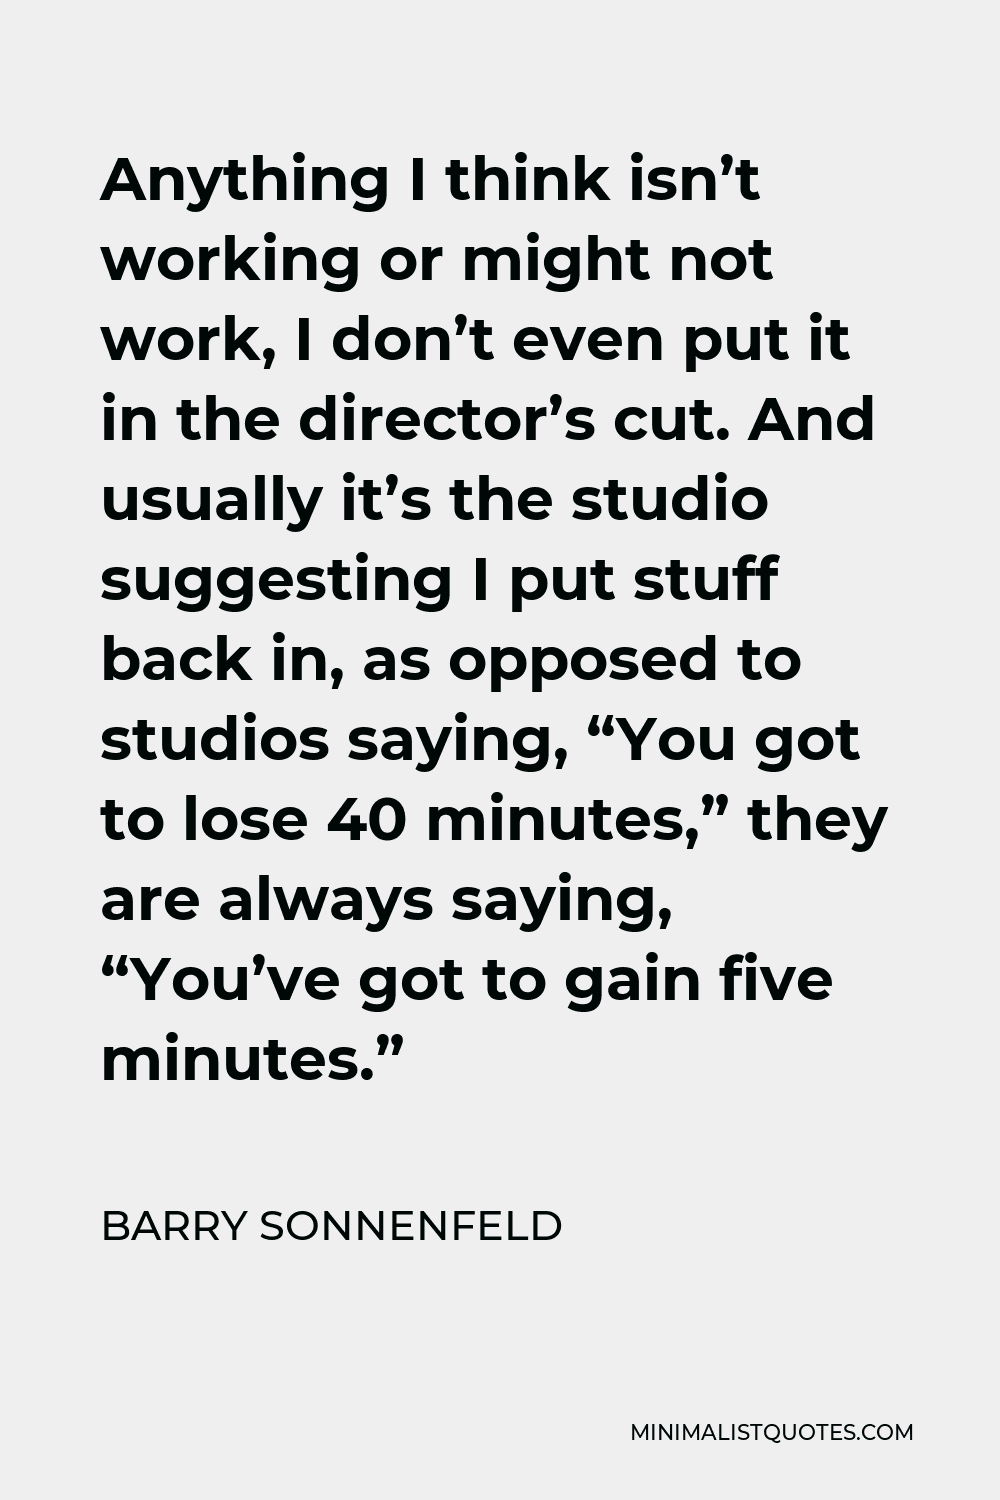 Barry Sonnenfeld Quote - Anything I think isn’t working or might not work, I don’t even put it in the director’s cut. And usually it’s the studio suggesting I put stuff back in, as opposed to studios saying, “You got to lose 40 minutes,” they are always saying, “You’ve got to gain five minutes.”